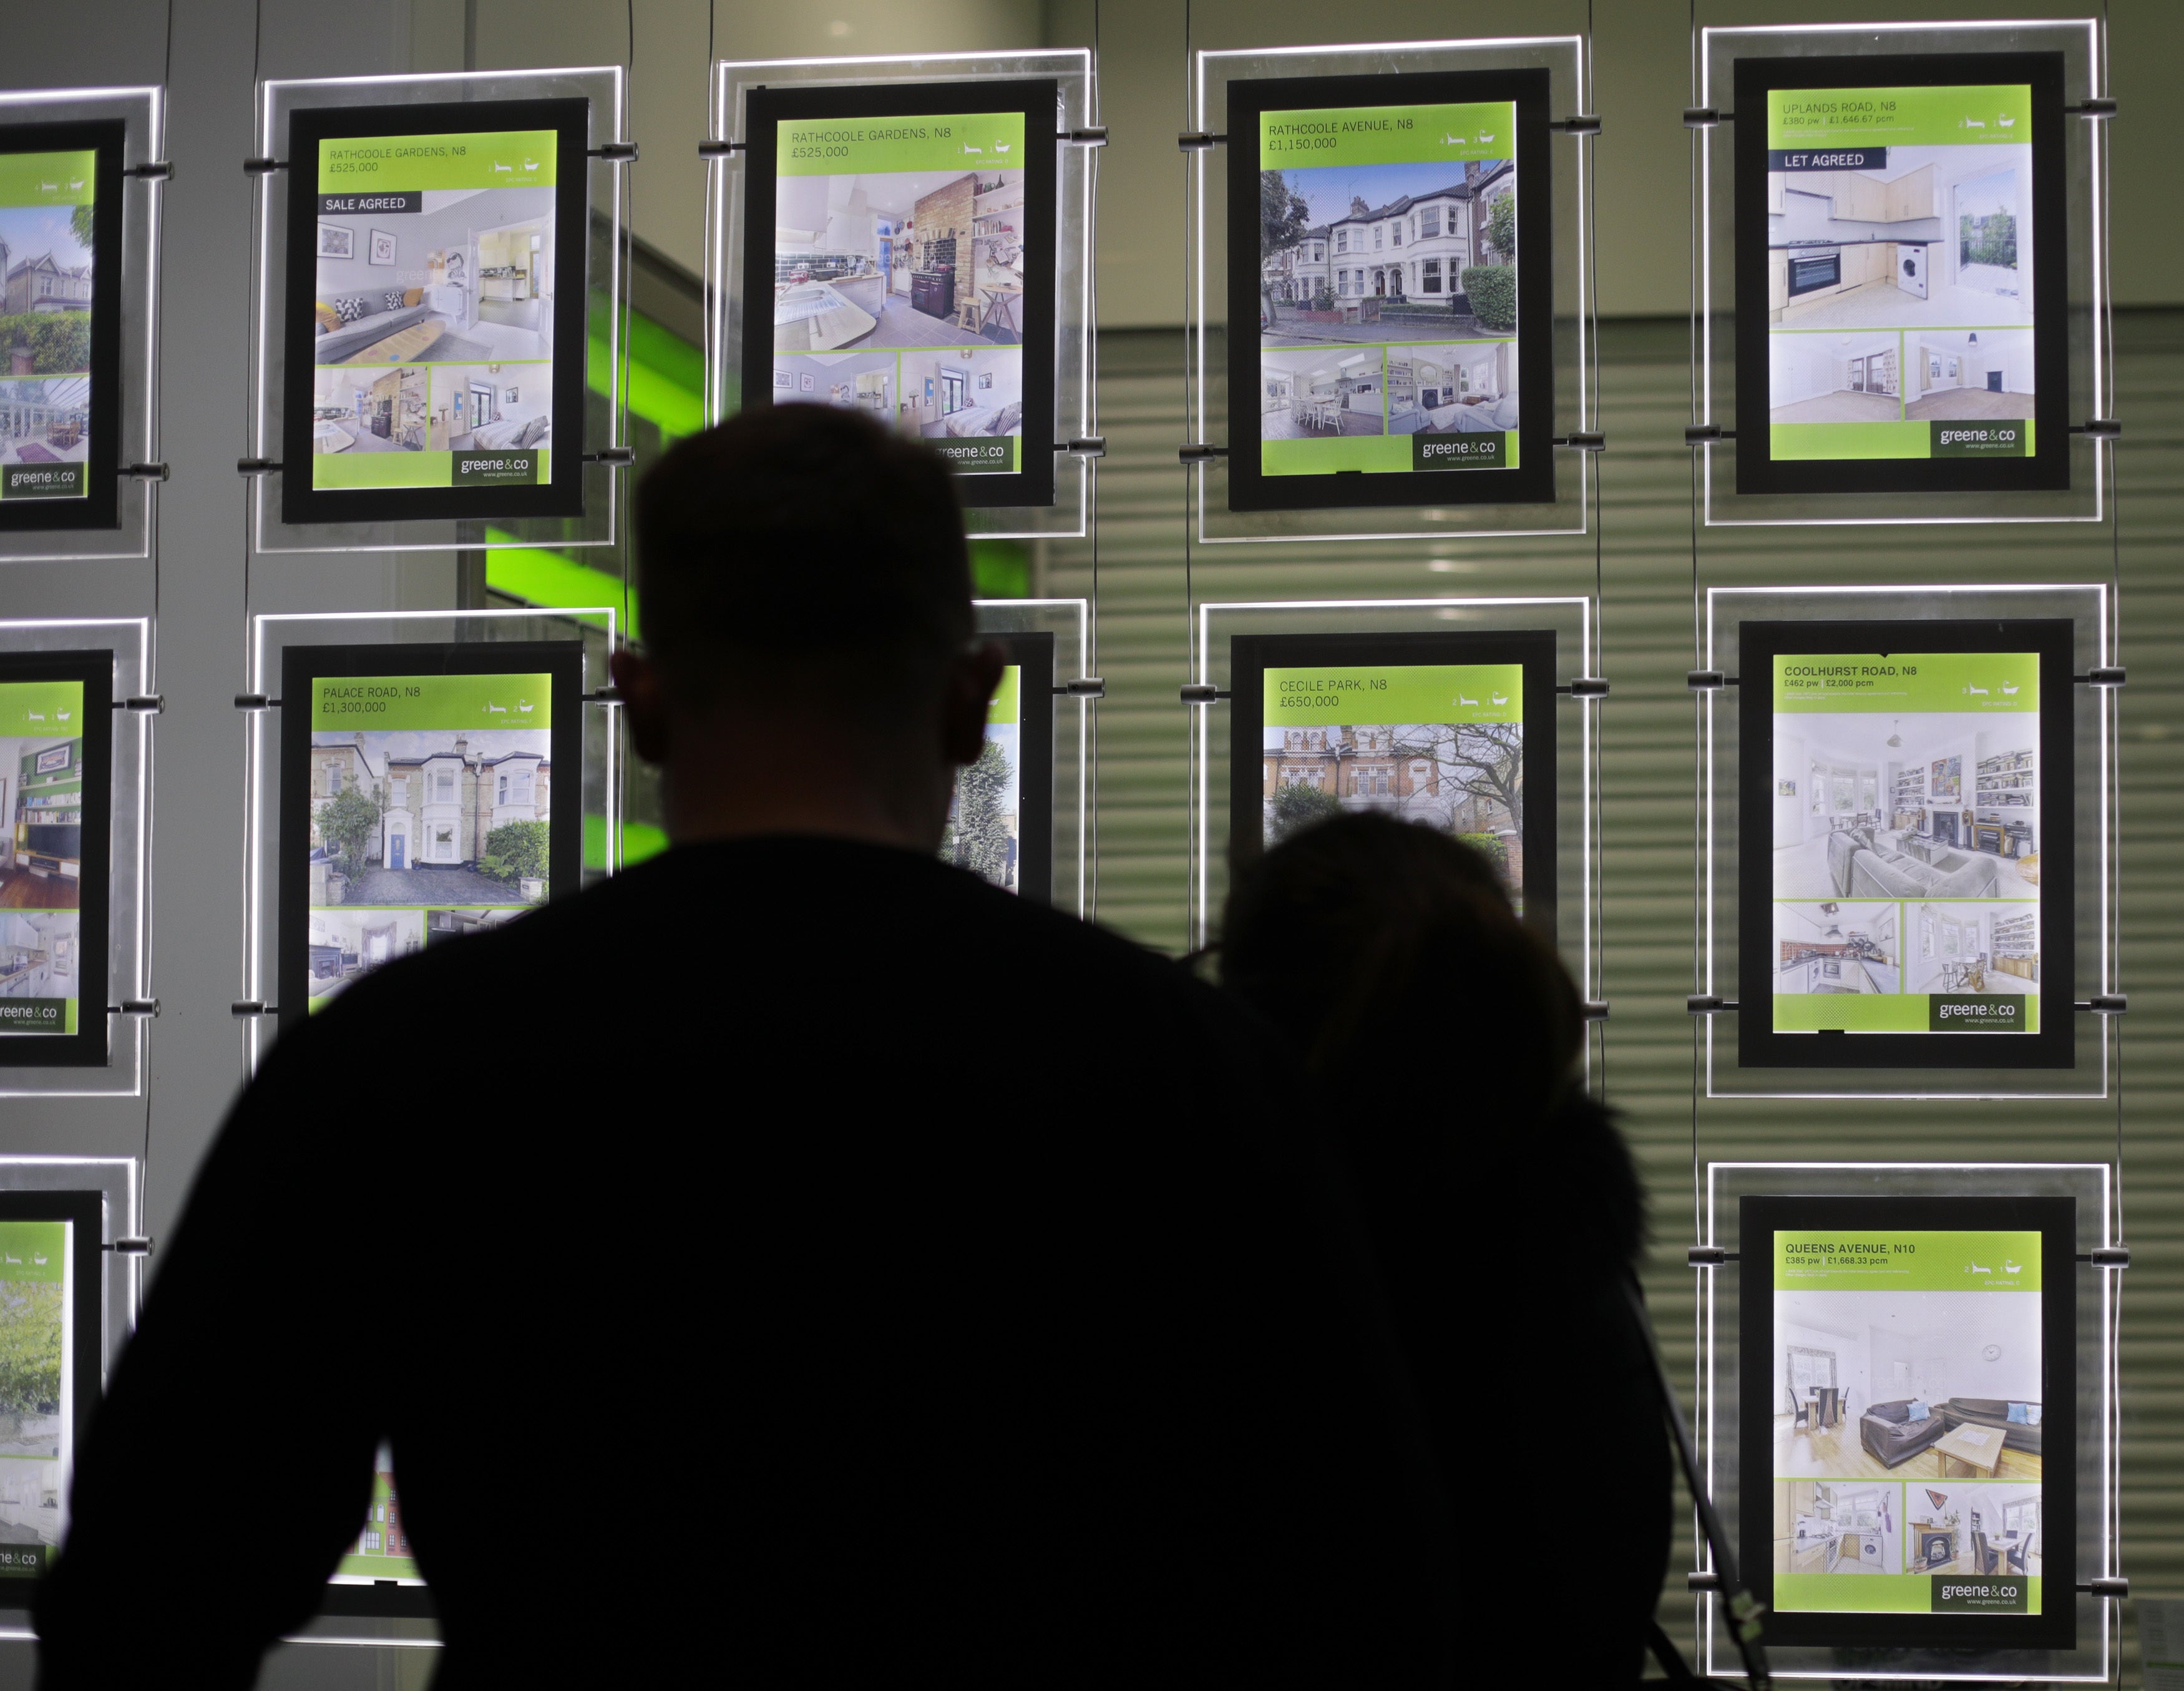 The average UK house price hit a record high of £276,759 at the start of 2022 after increasing by around £24,500 over the past year, according to Halifax (Yui Mok/PA)